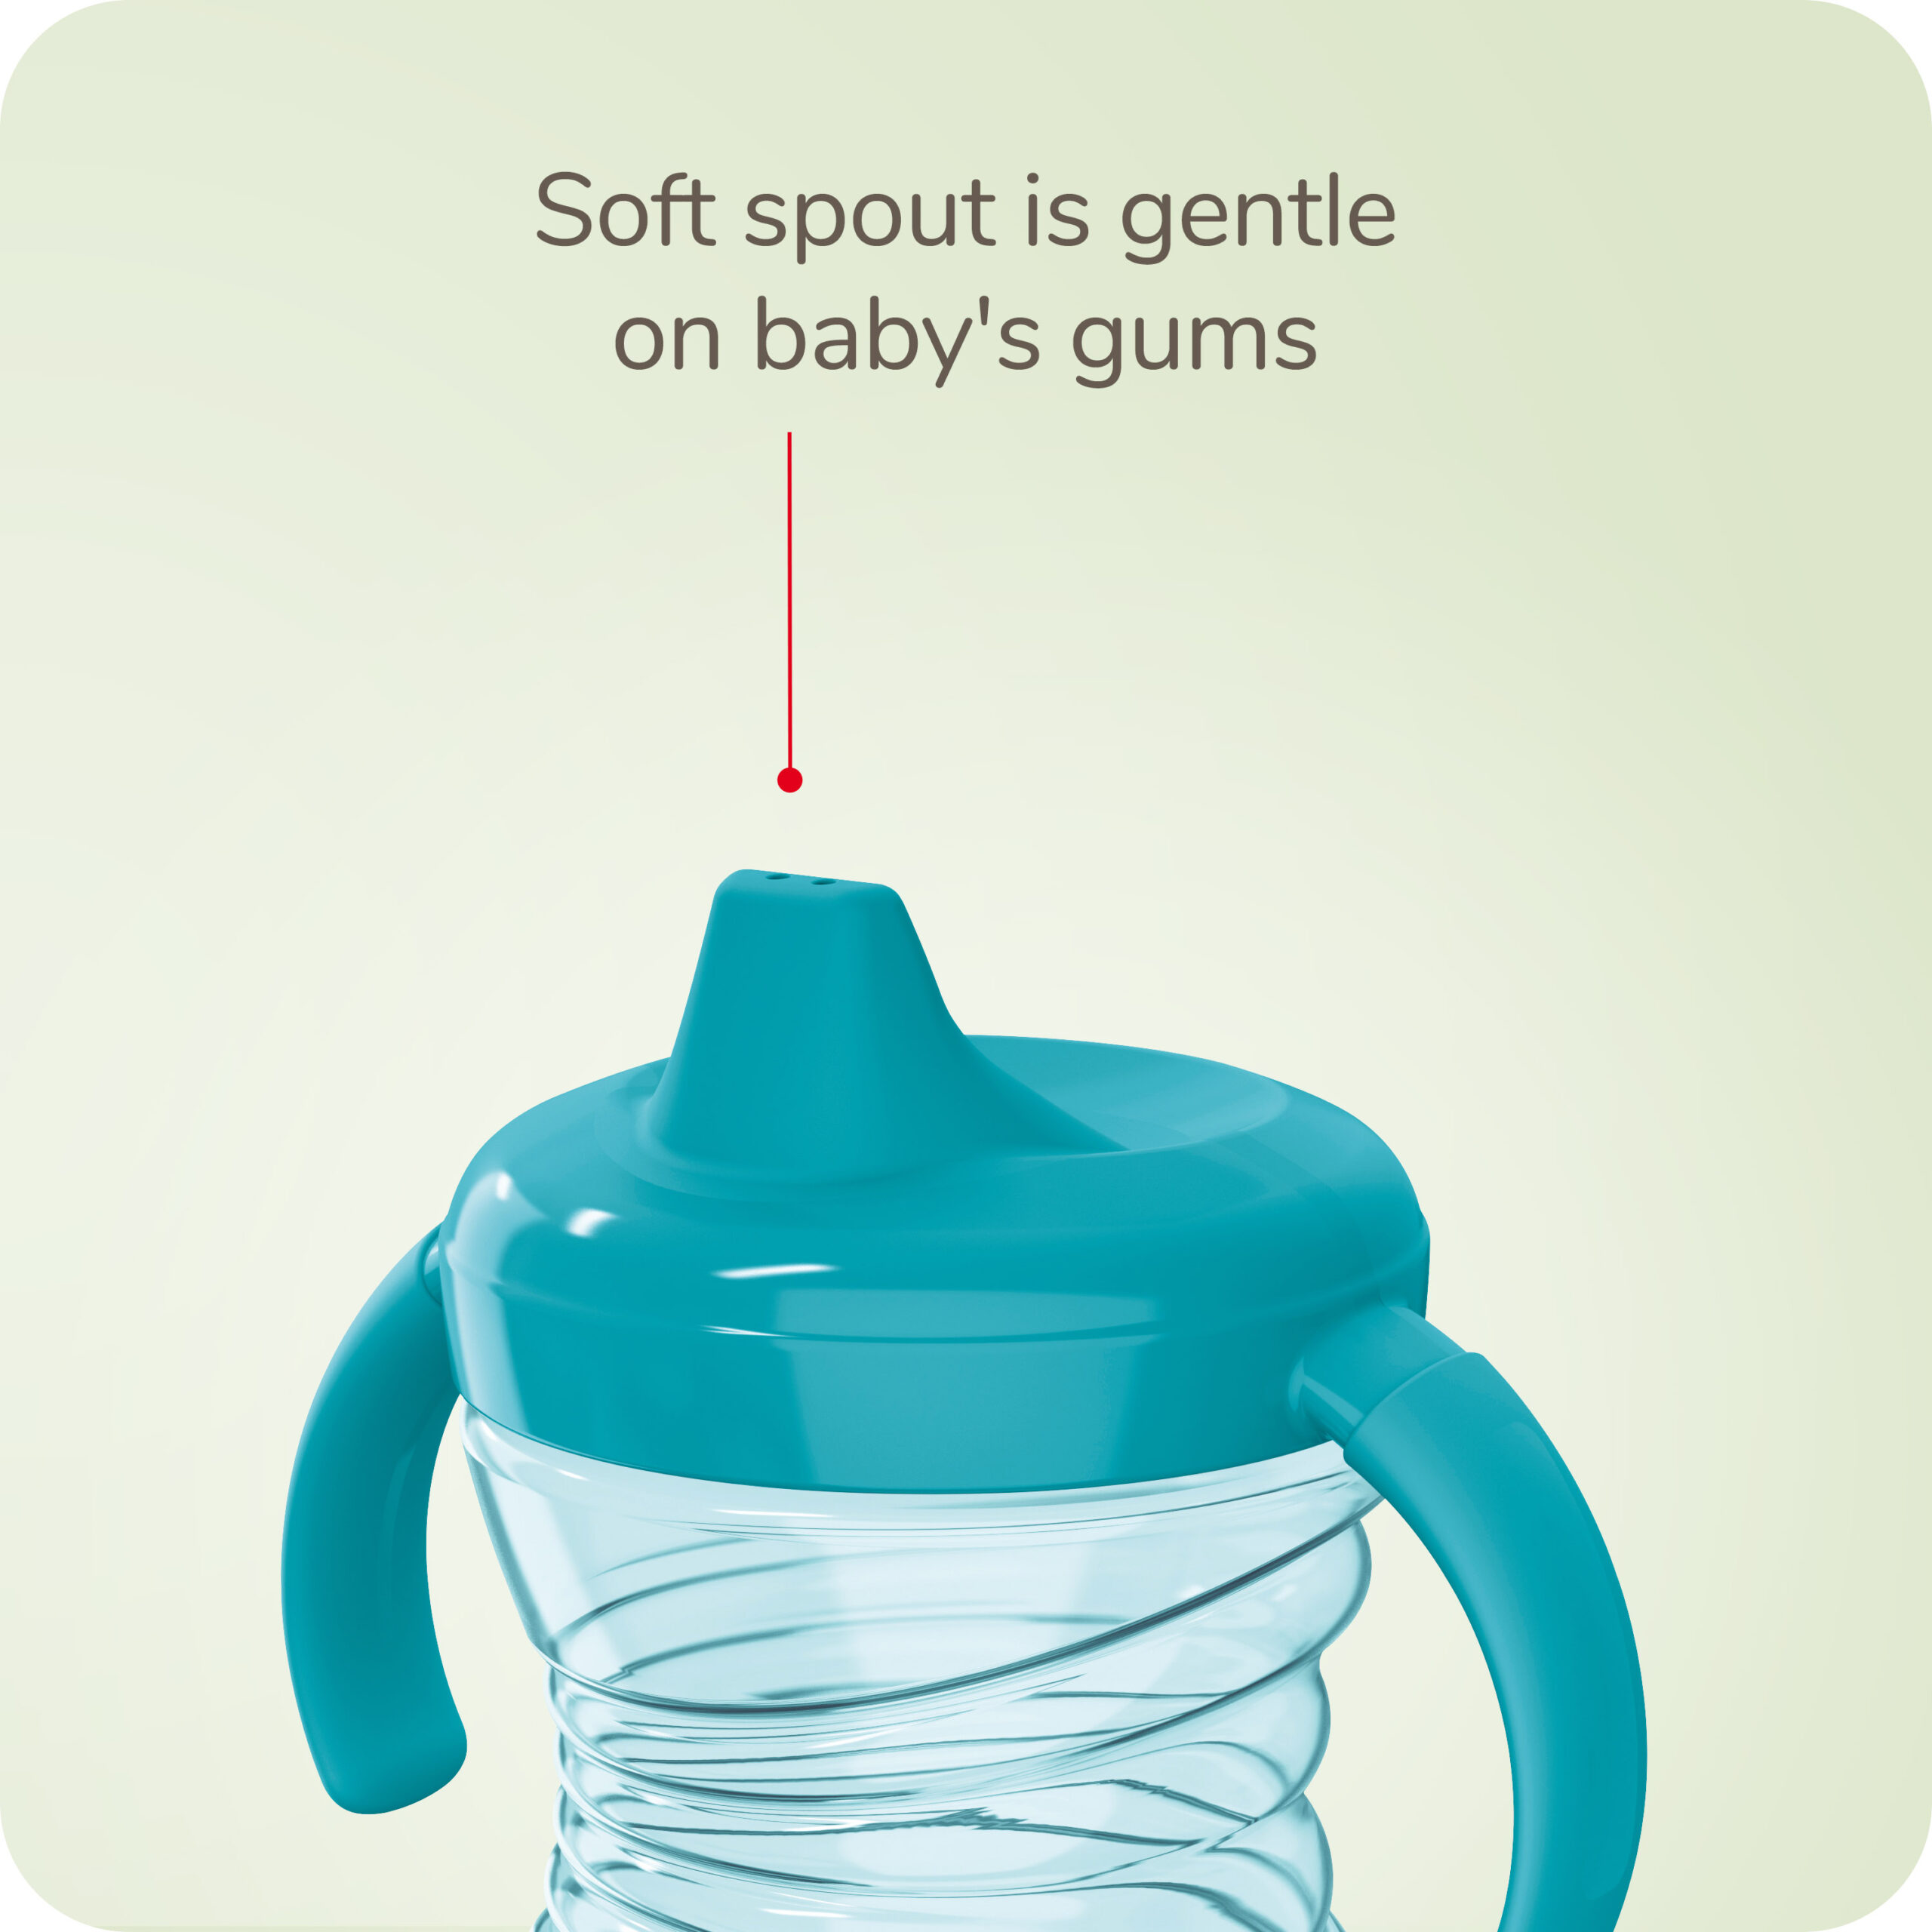 NUK® Fun Grips Hard Spout Sippy Cup, 10OZ Product Image 5 of 7